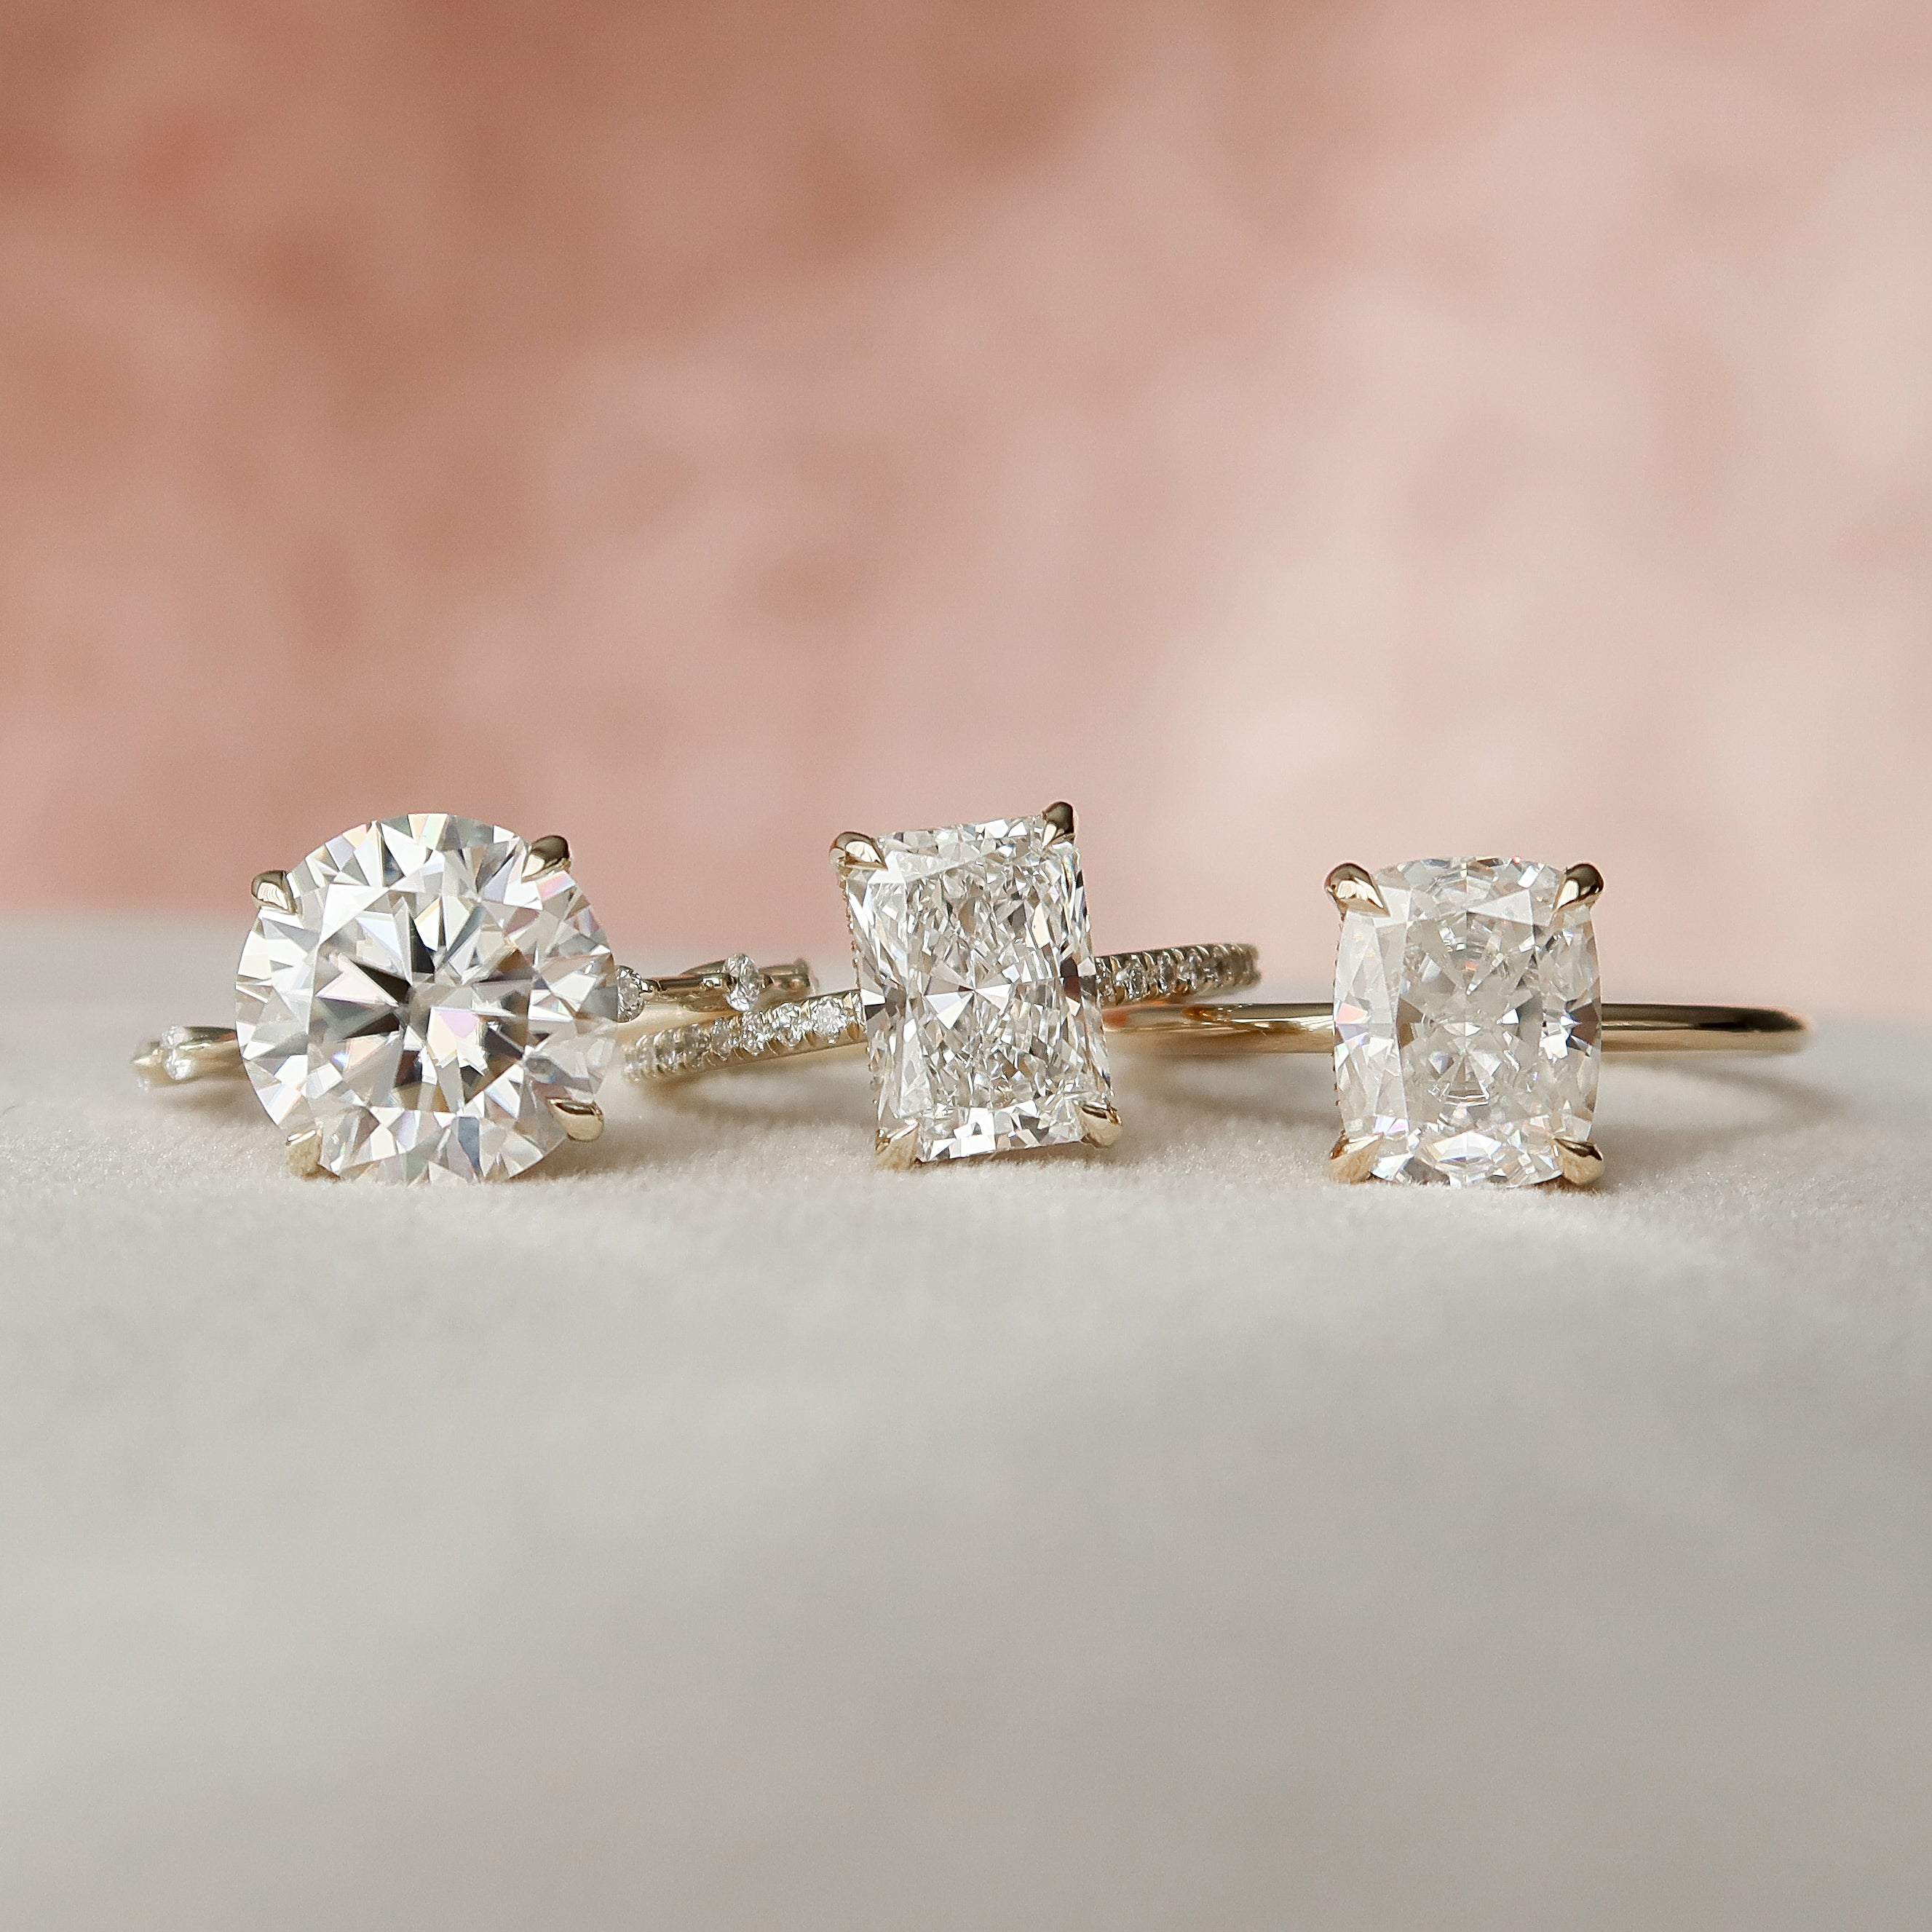 How Much to Spend on an Engagement Ring